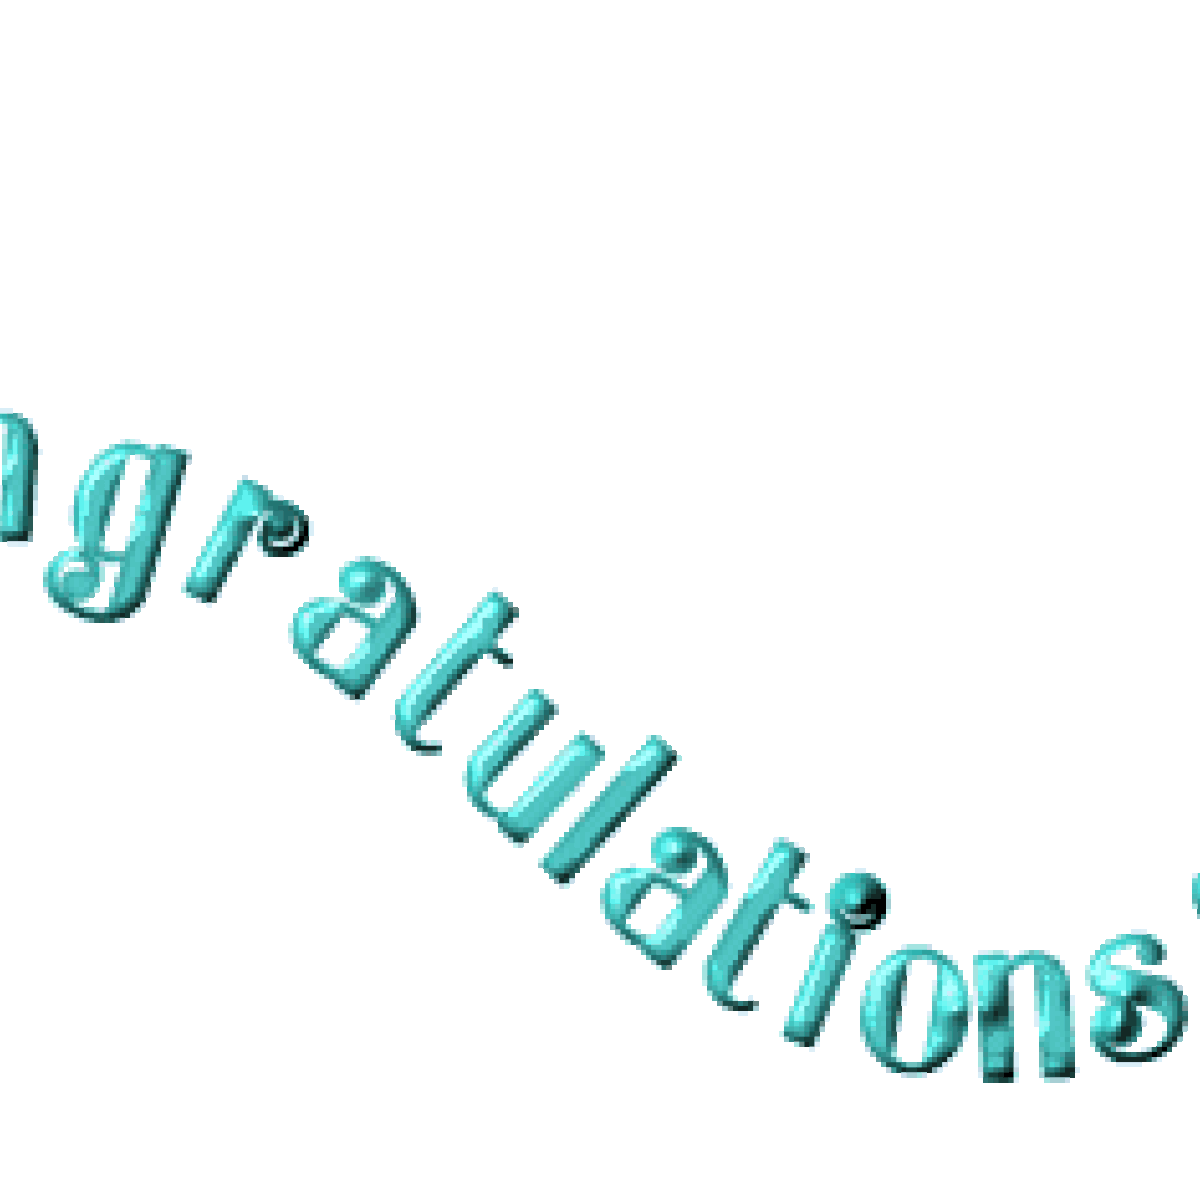 20 Ways for how to Say Congratulations to Someone - HubPages